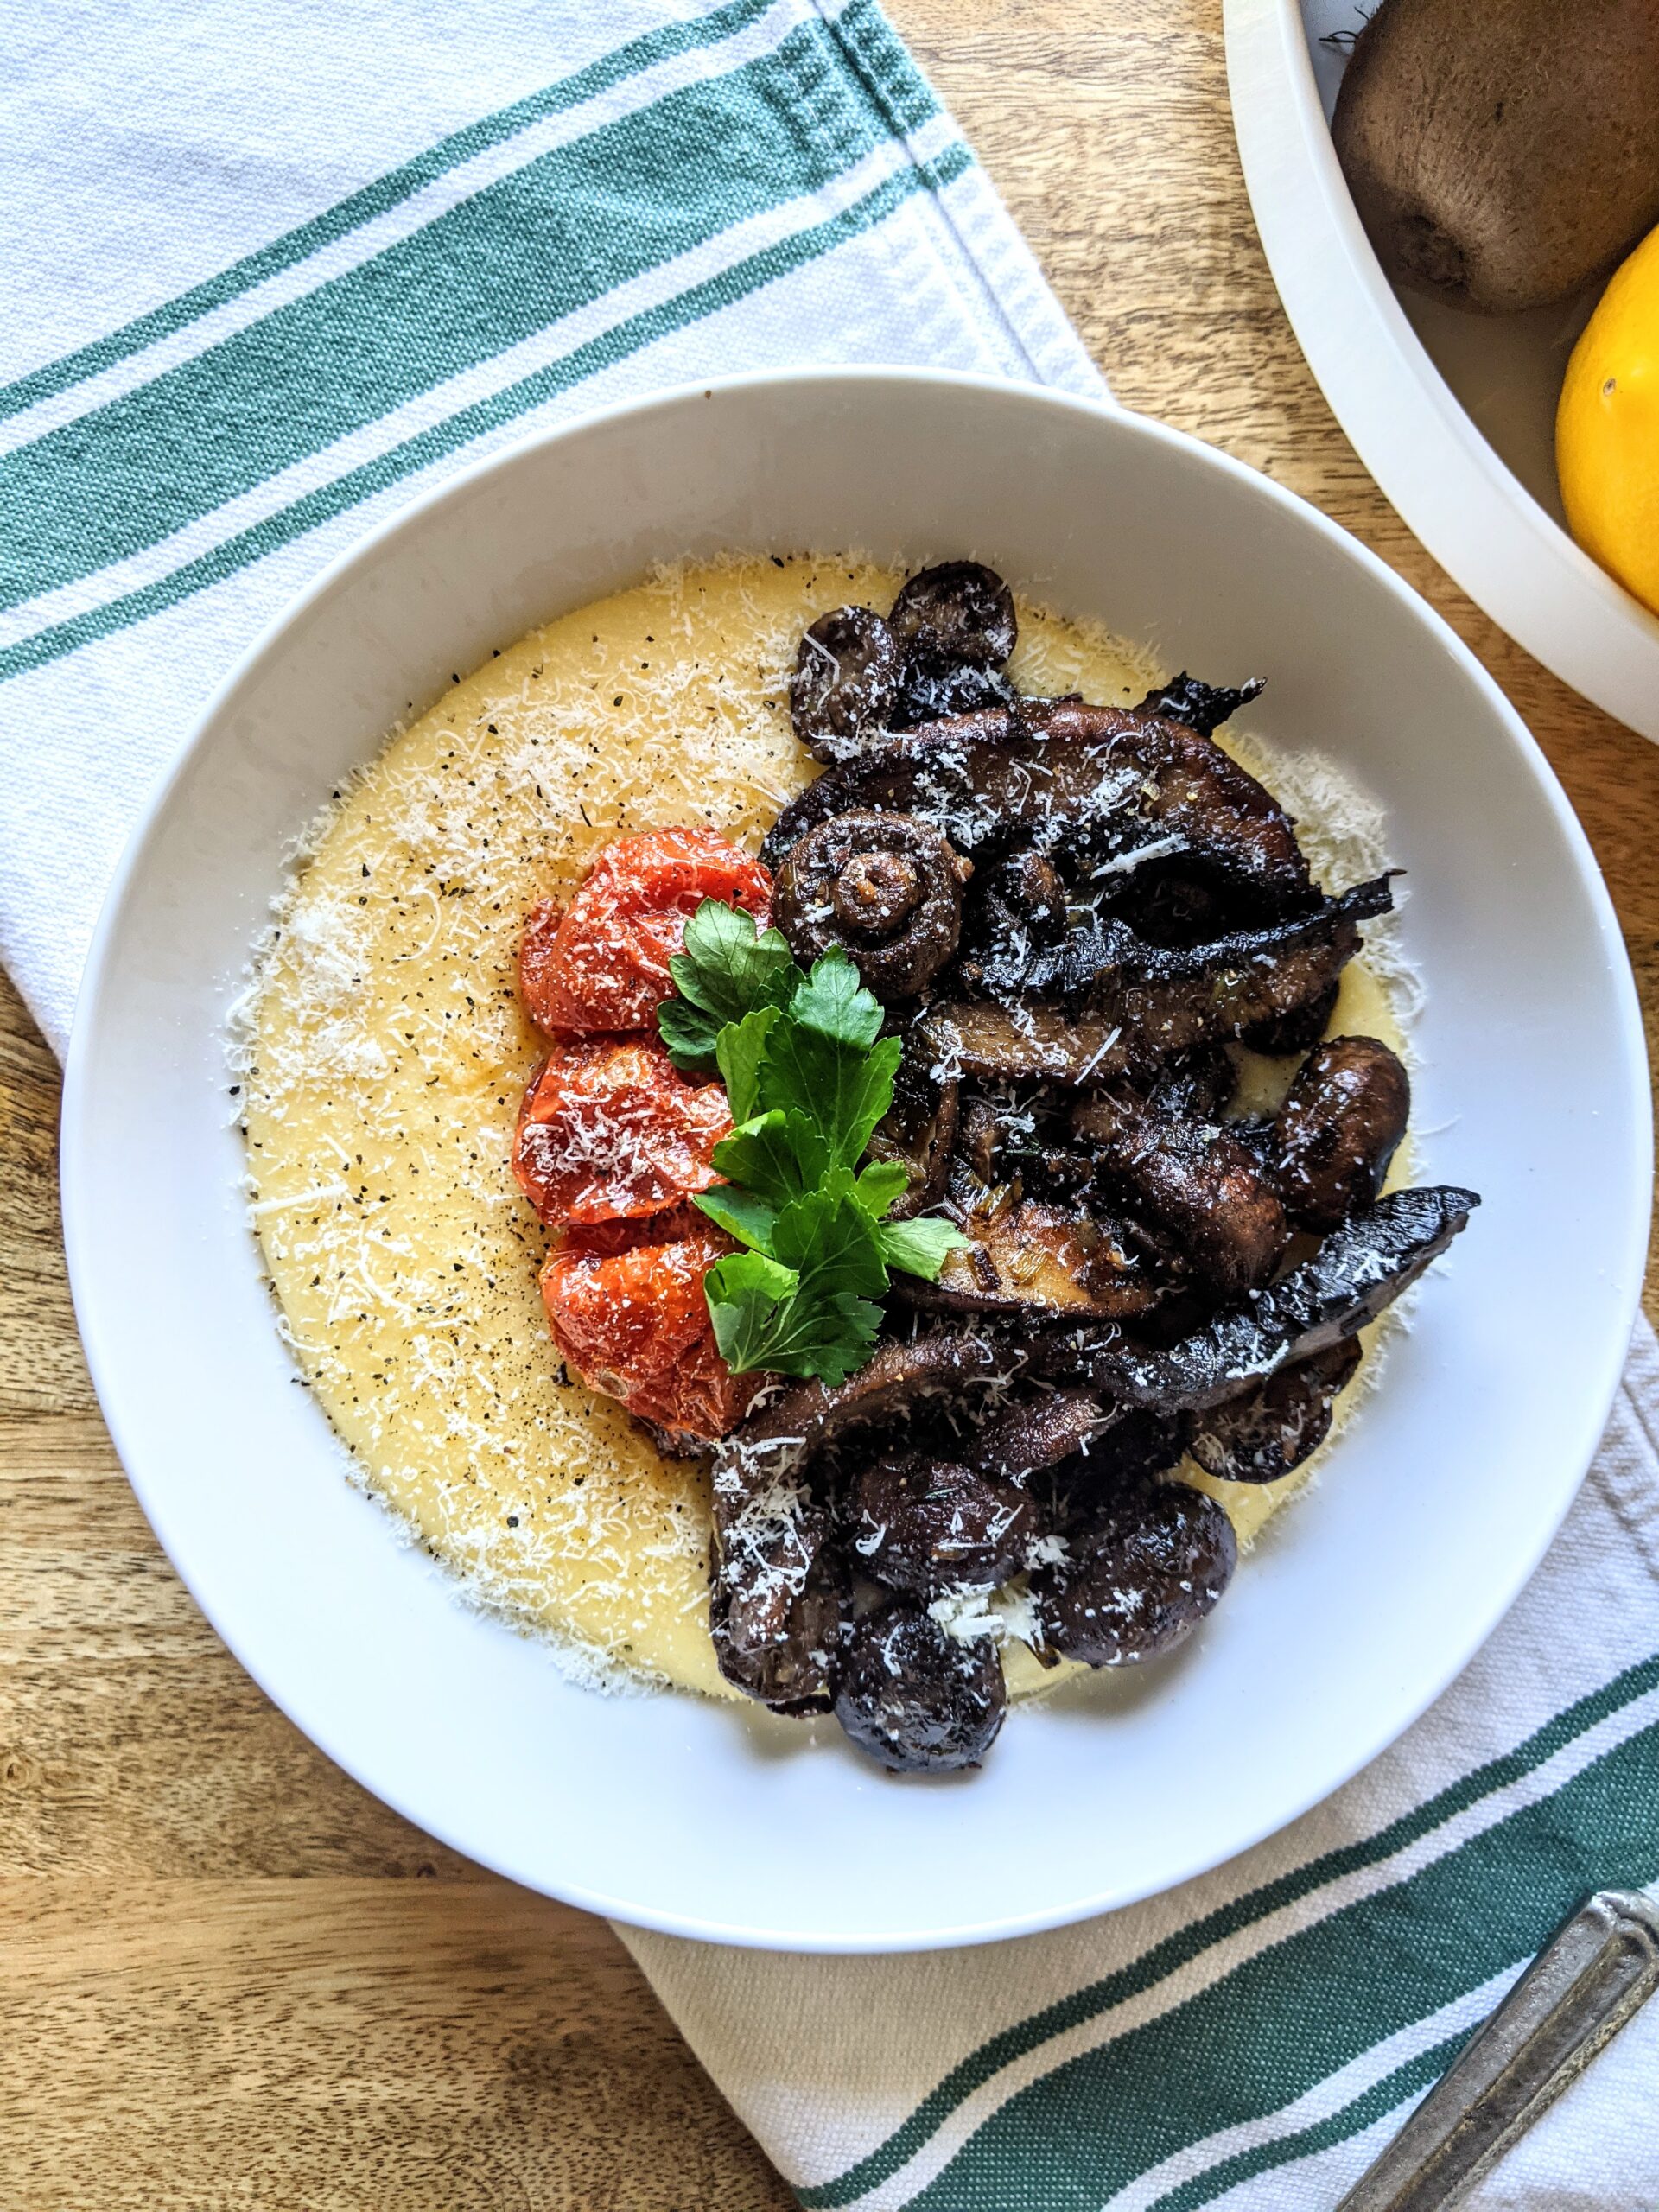 A bowl of creamy Pecorino polenta, topped with assorted mushrooms cooked with cognac and garlic. Garnished with 3 small roasted tomatoes and Italian parsley.